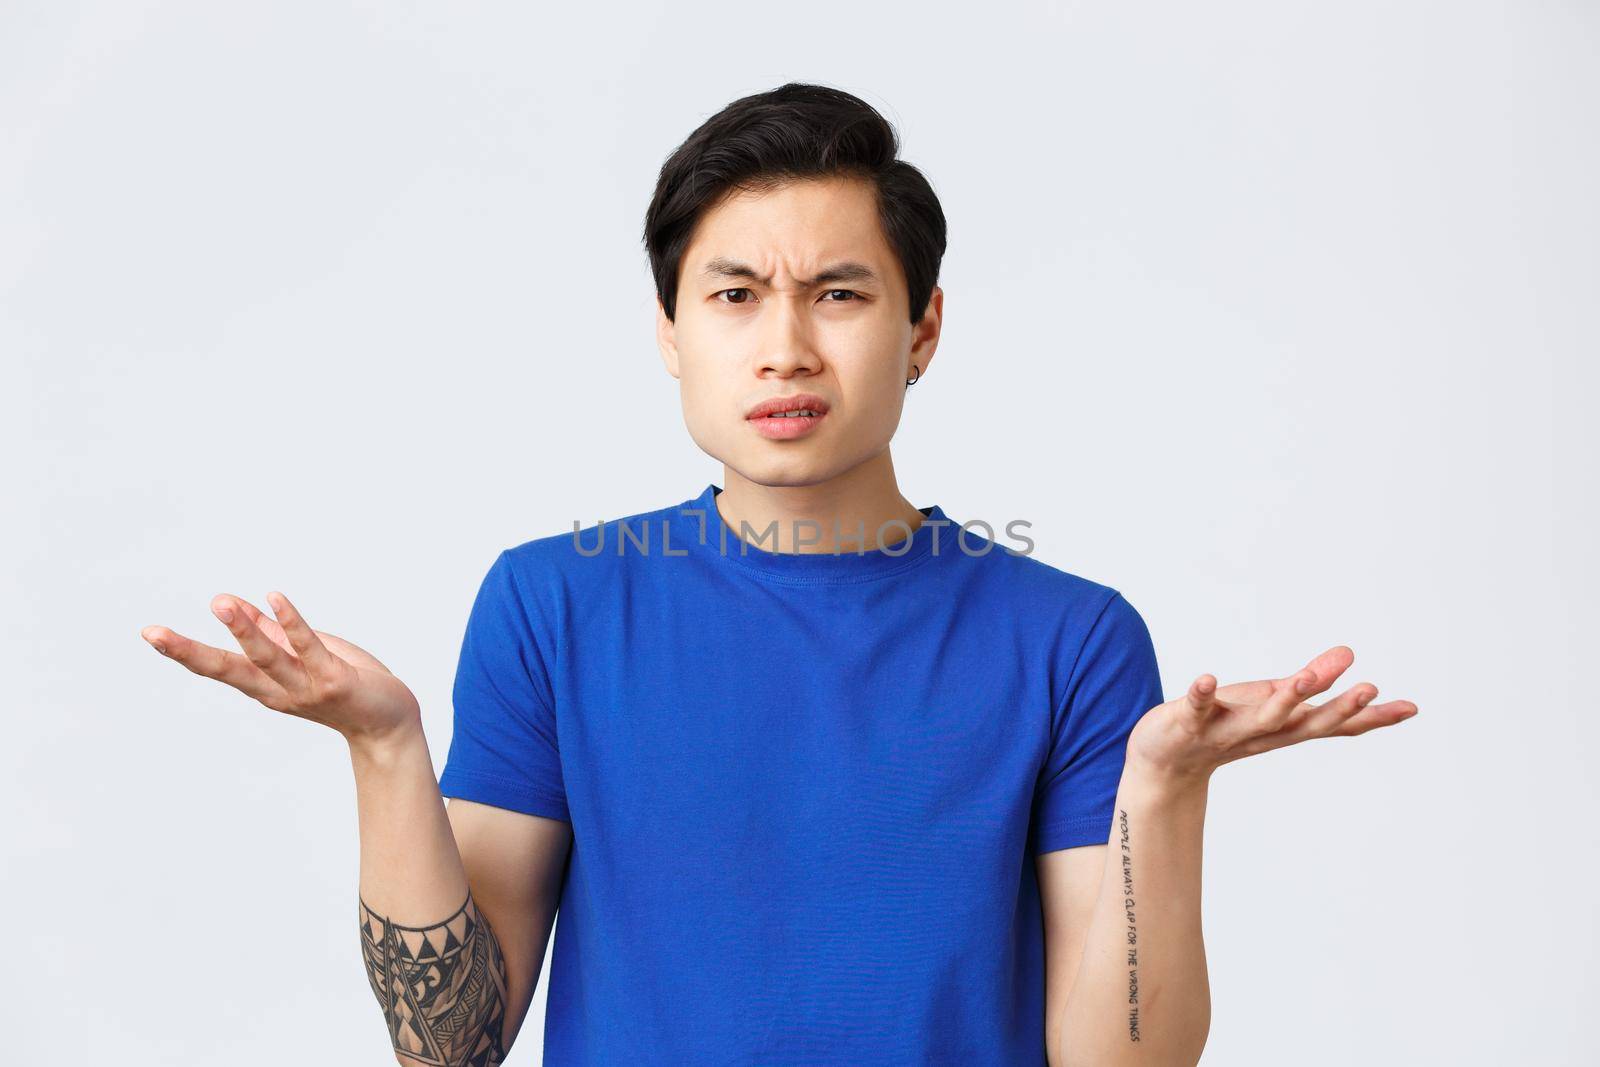 Lifestyle, people emotions and beauty concept. Confused and indecisive young asian man cant understand what happened, shrugging with hands spread and puzzled grimace,wear blue t-shirt.